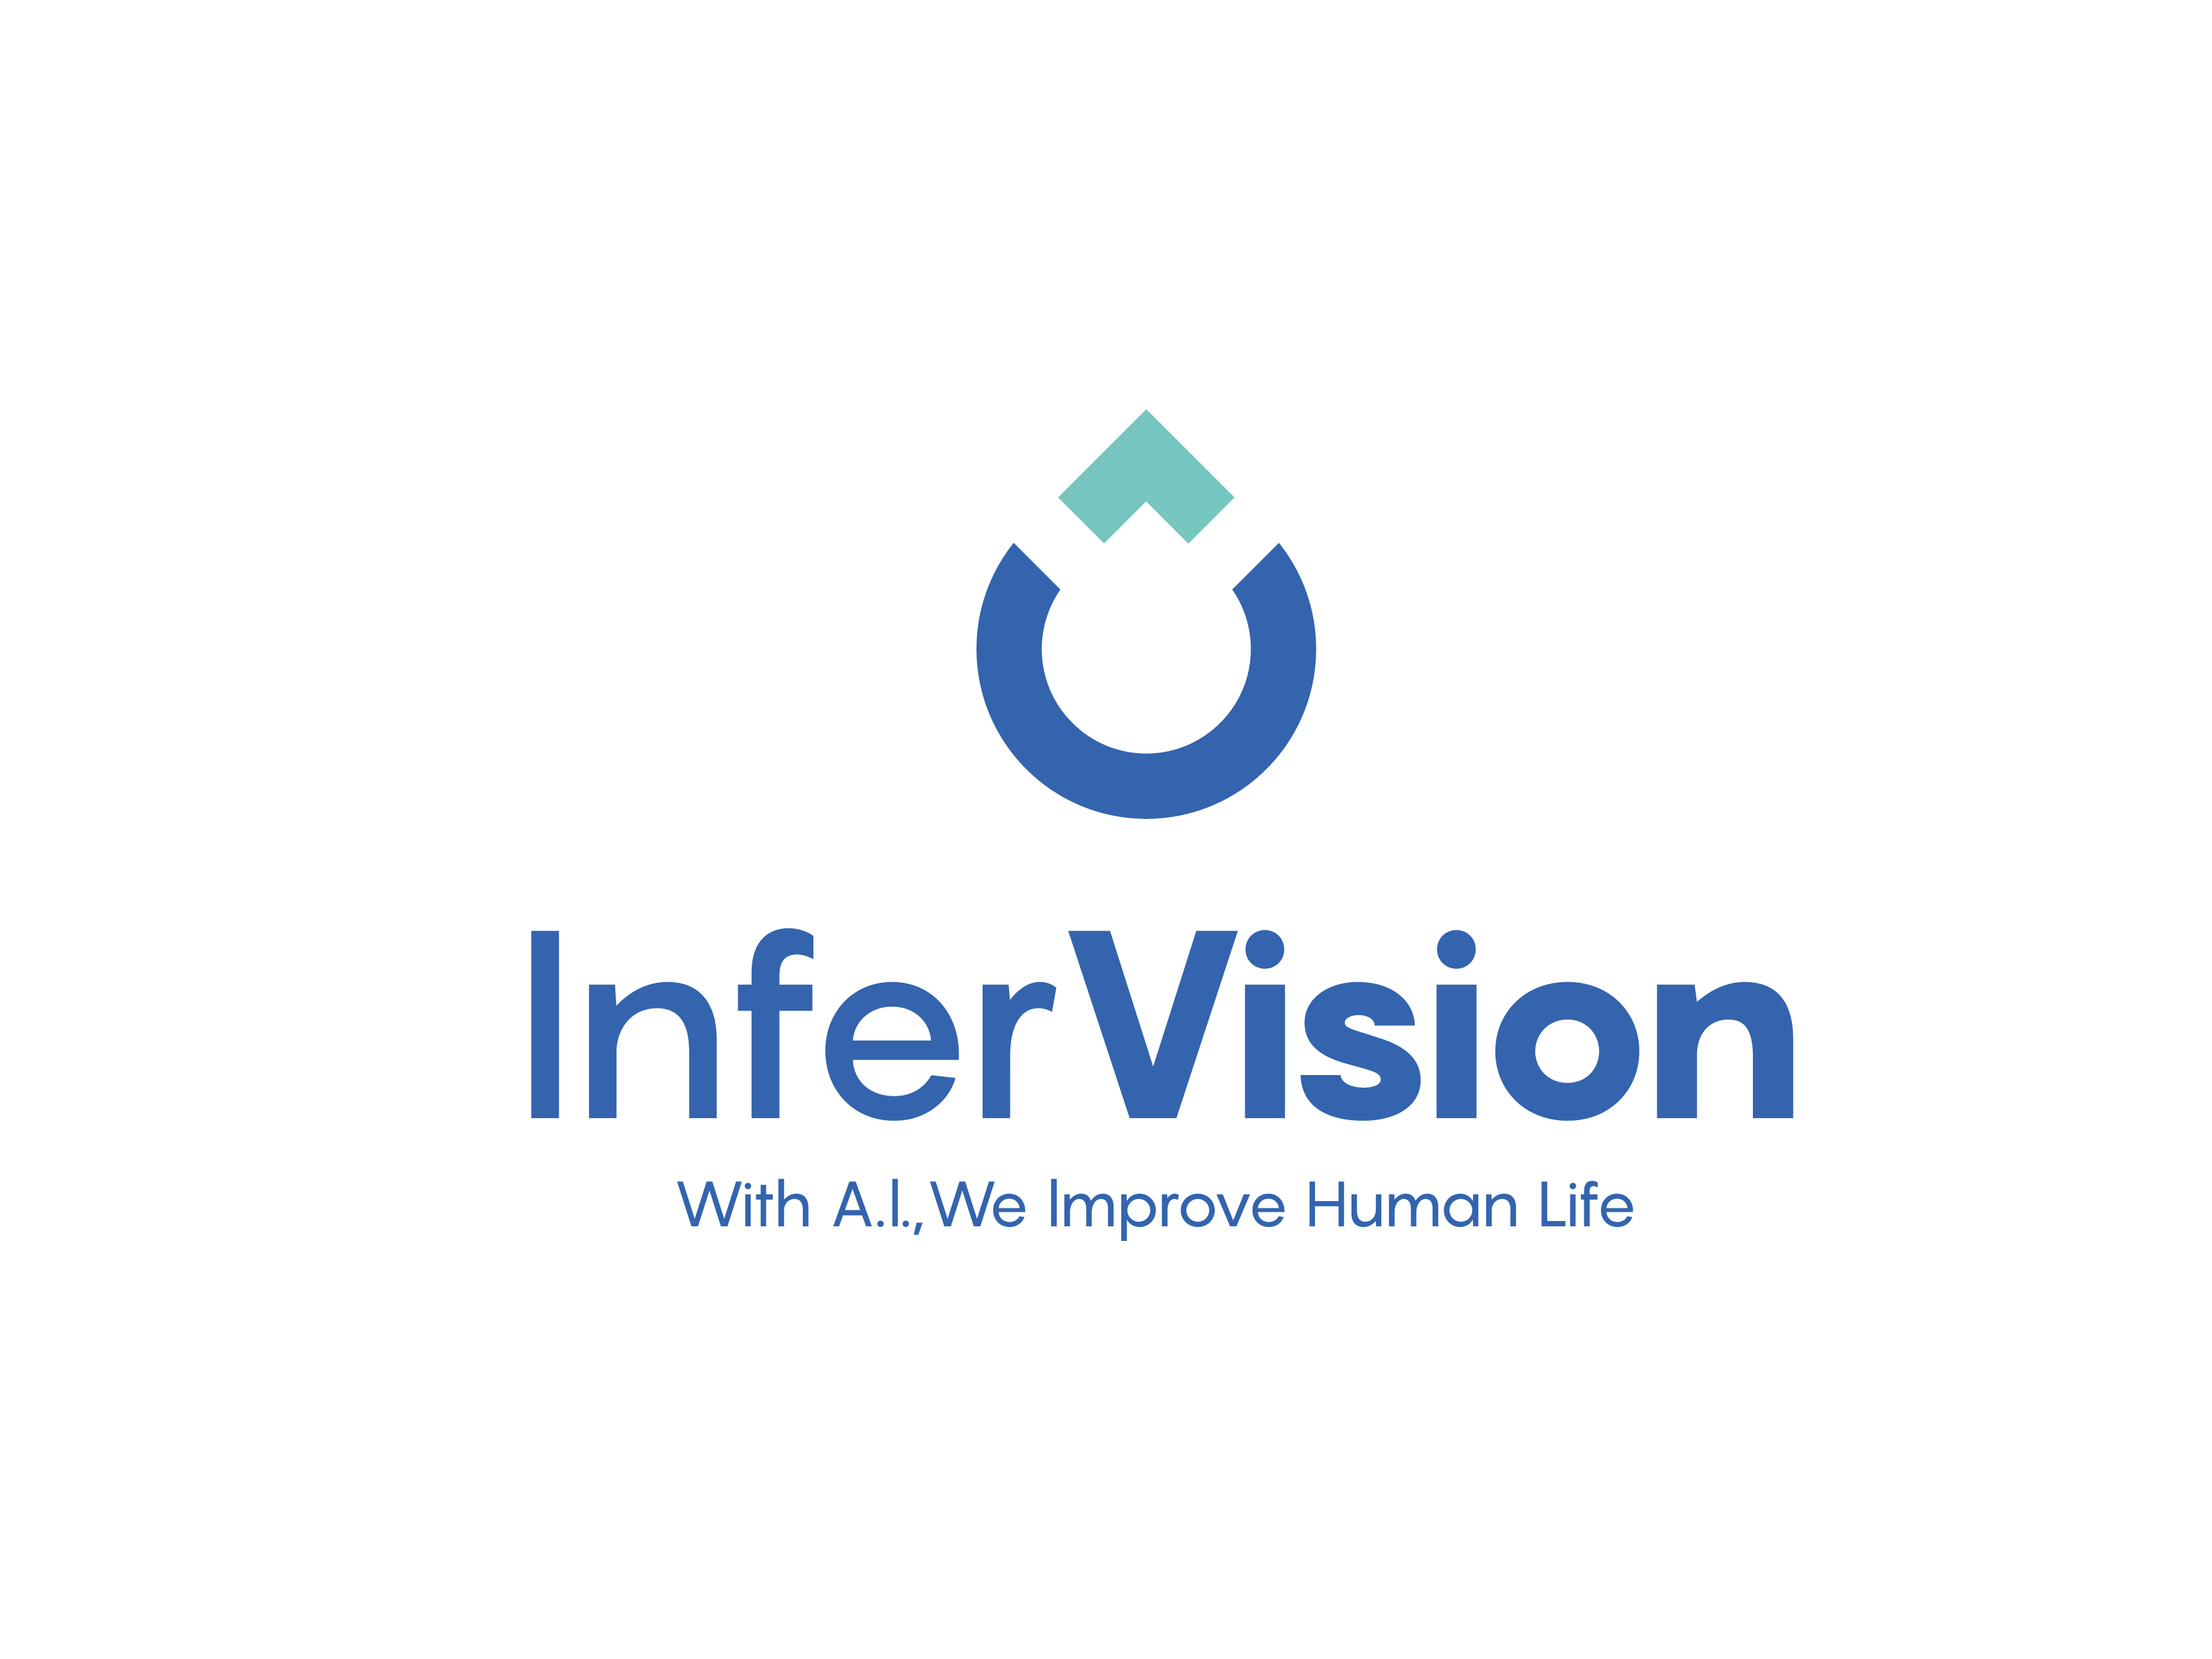 Announcing Infervision